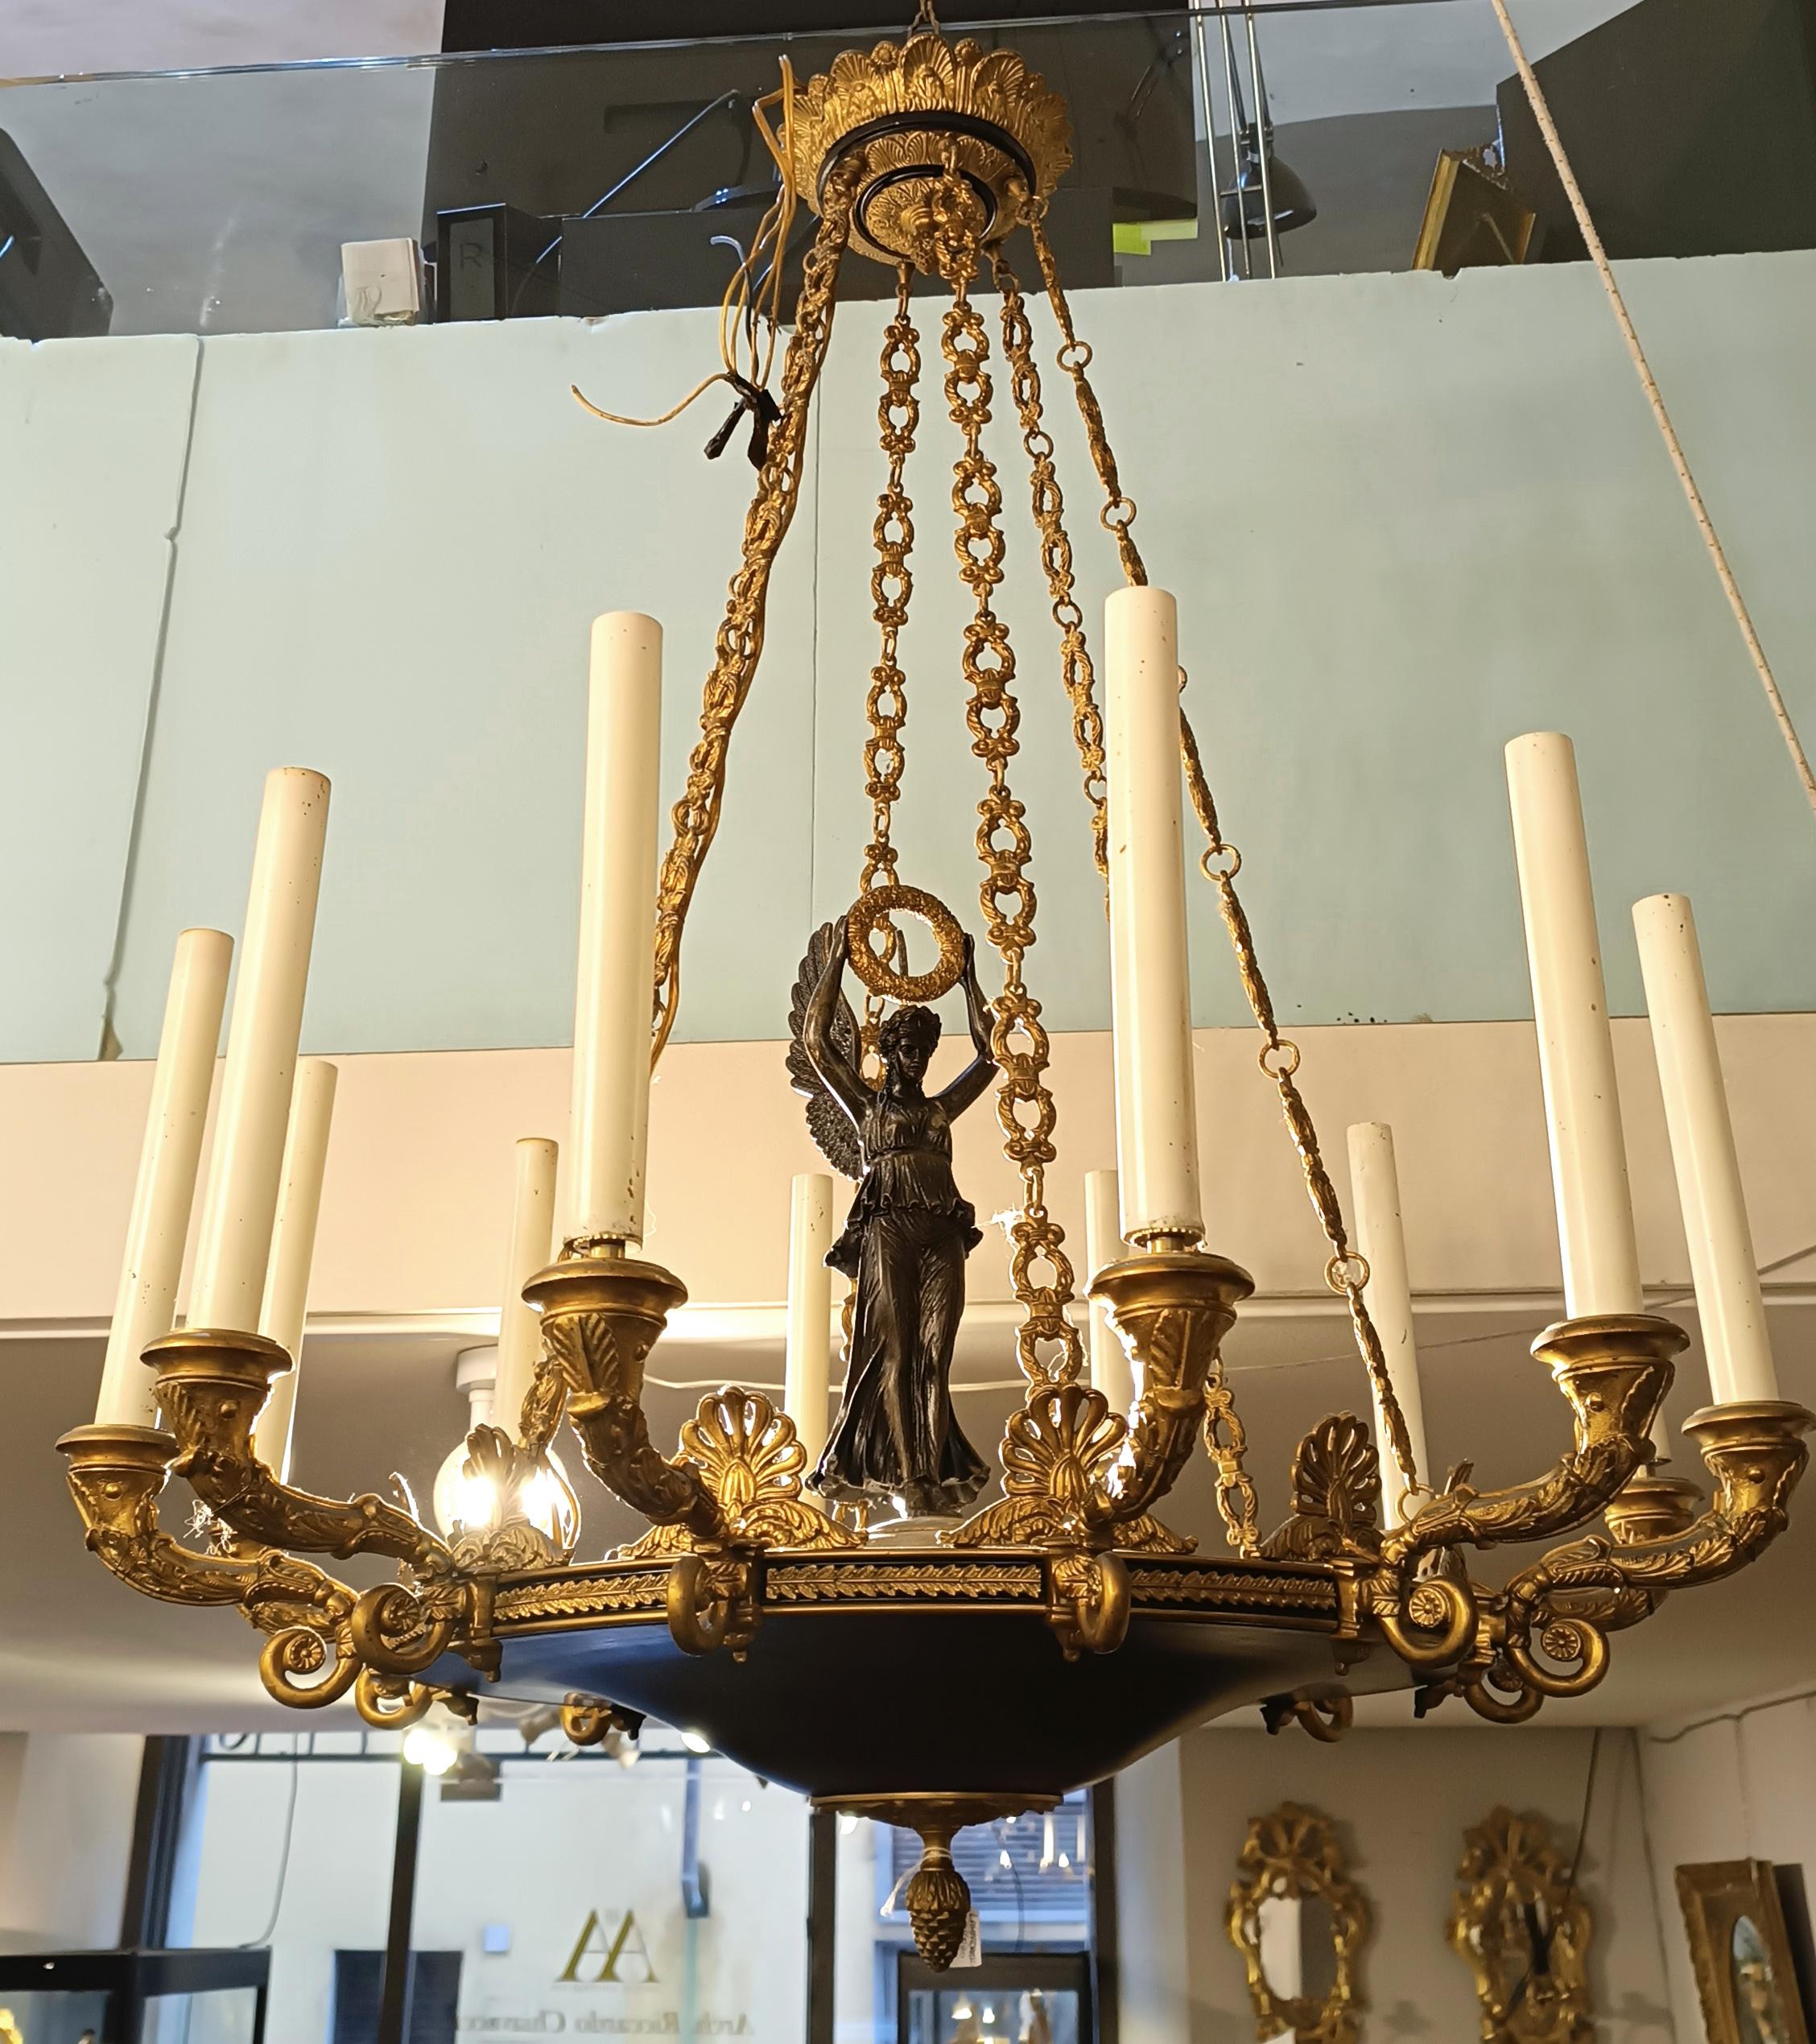 19th Century 19th CENTURY NAPOLEON III CHANDELIER WITH WINGED VICTORY